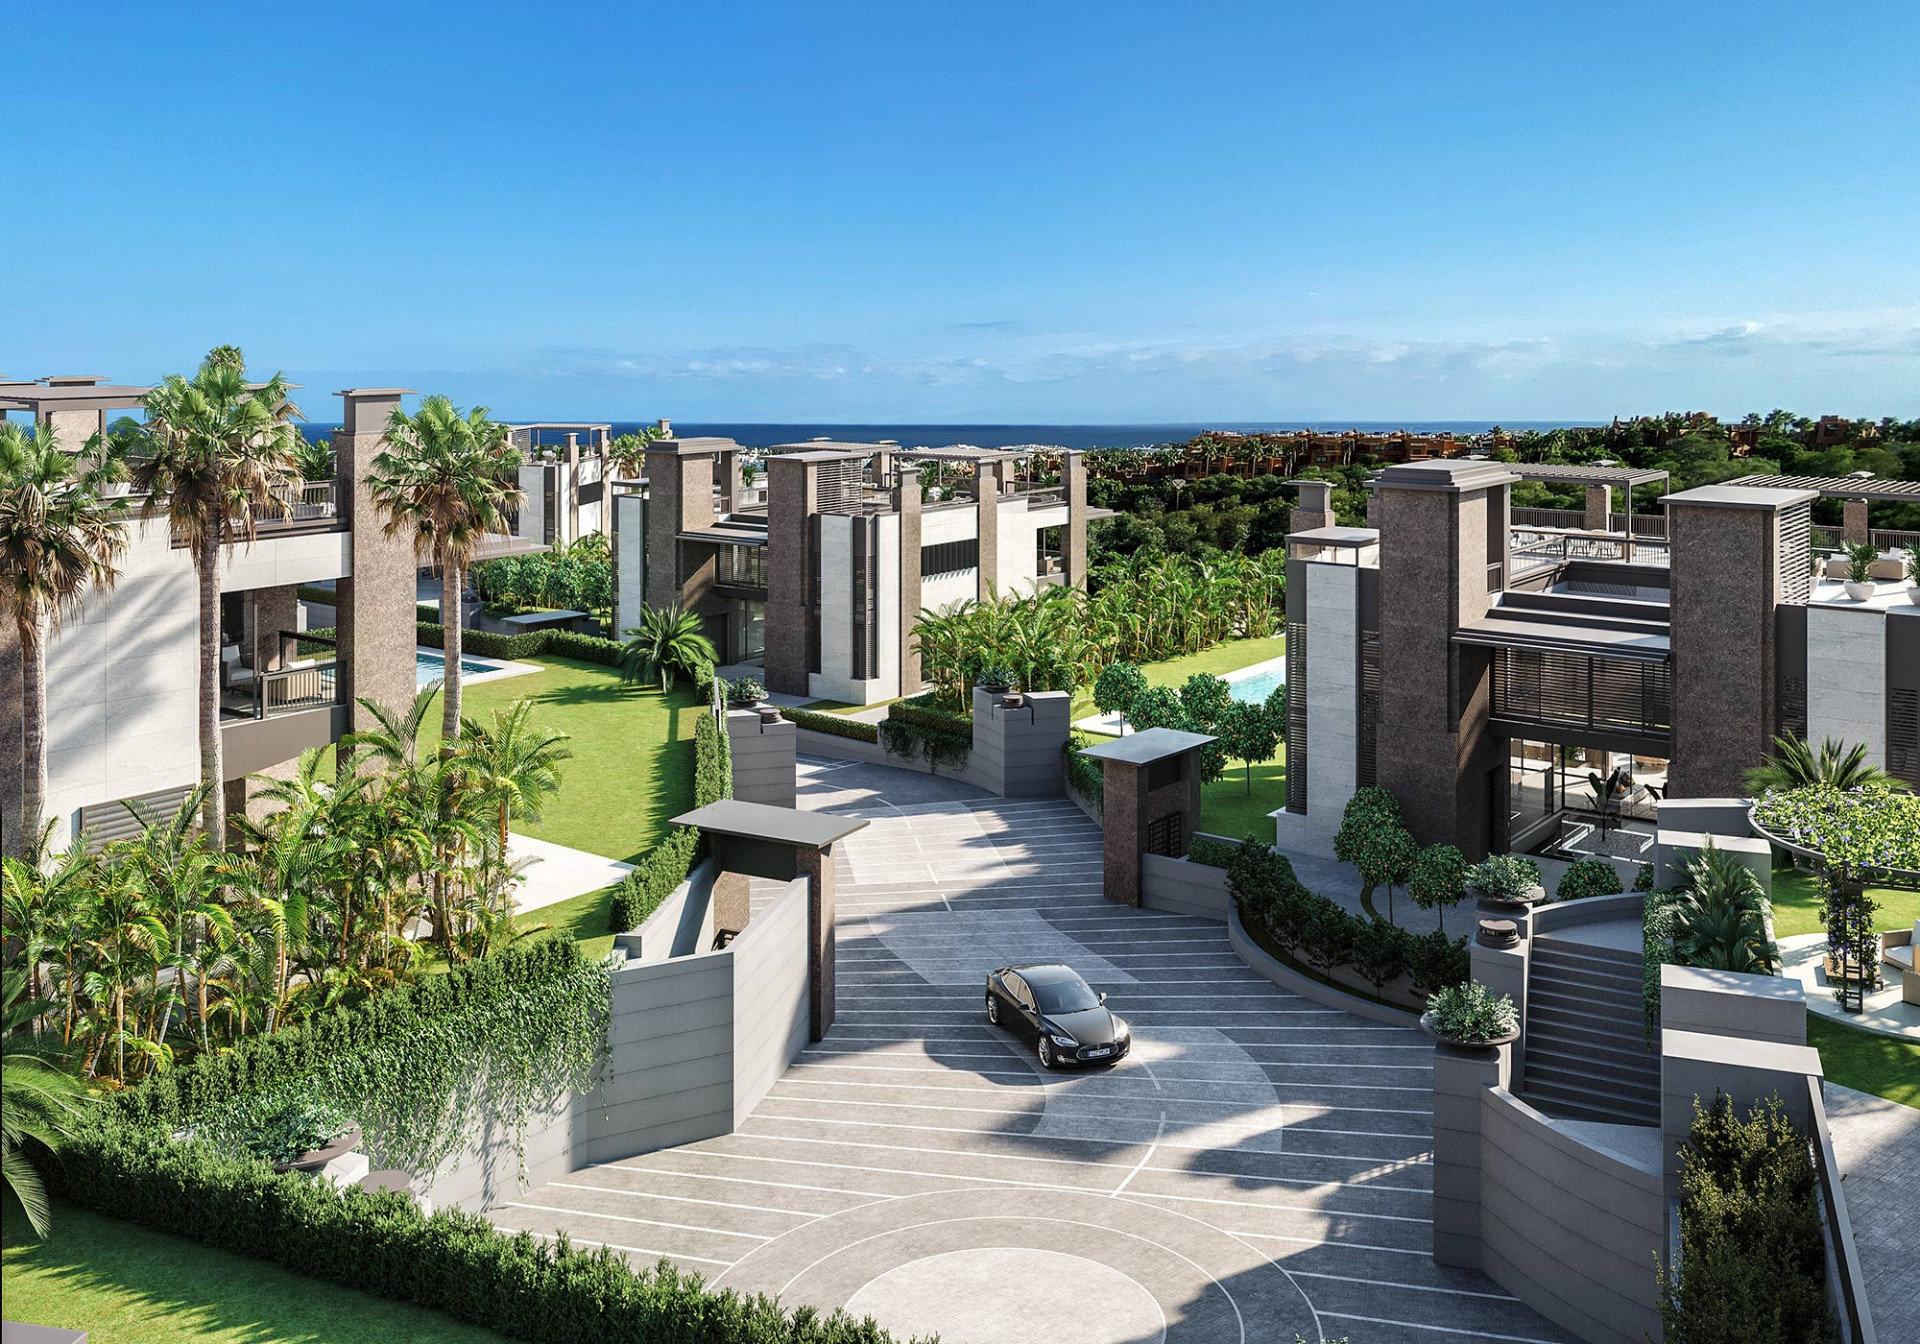 Palacetes de Banús: New luxury residential complex with panoramic views of the Mediterranean Sea, Puerto Banus and the mountains. | Image 2